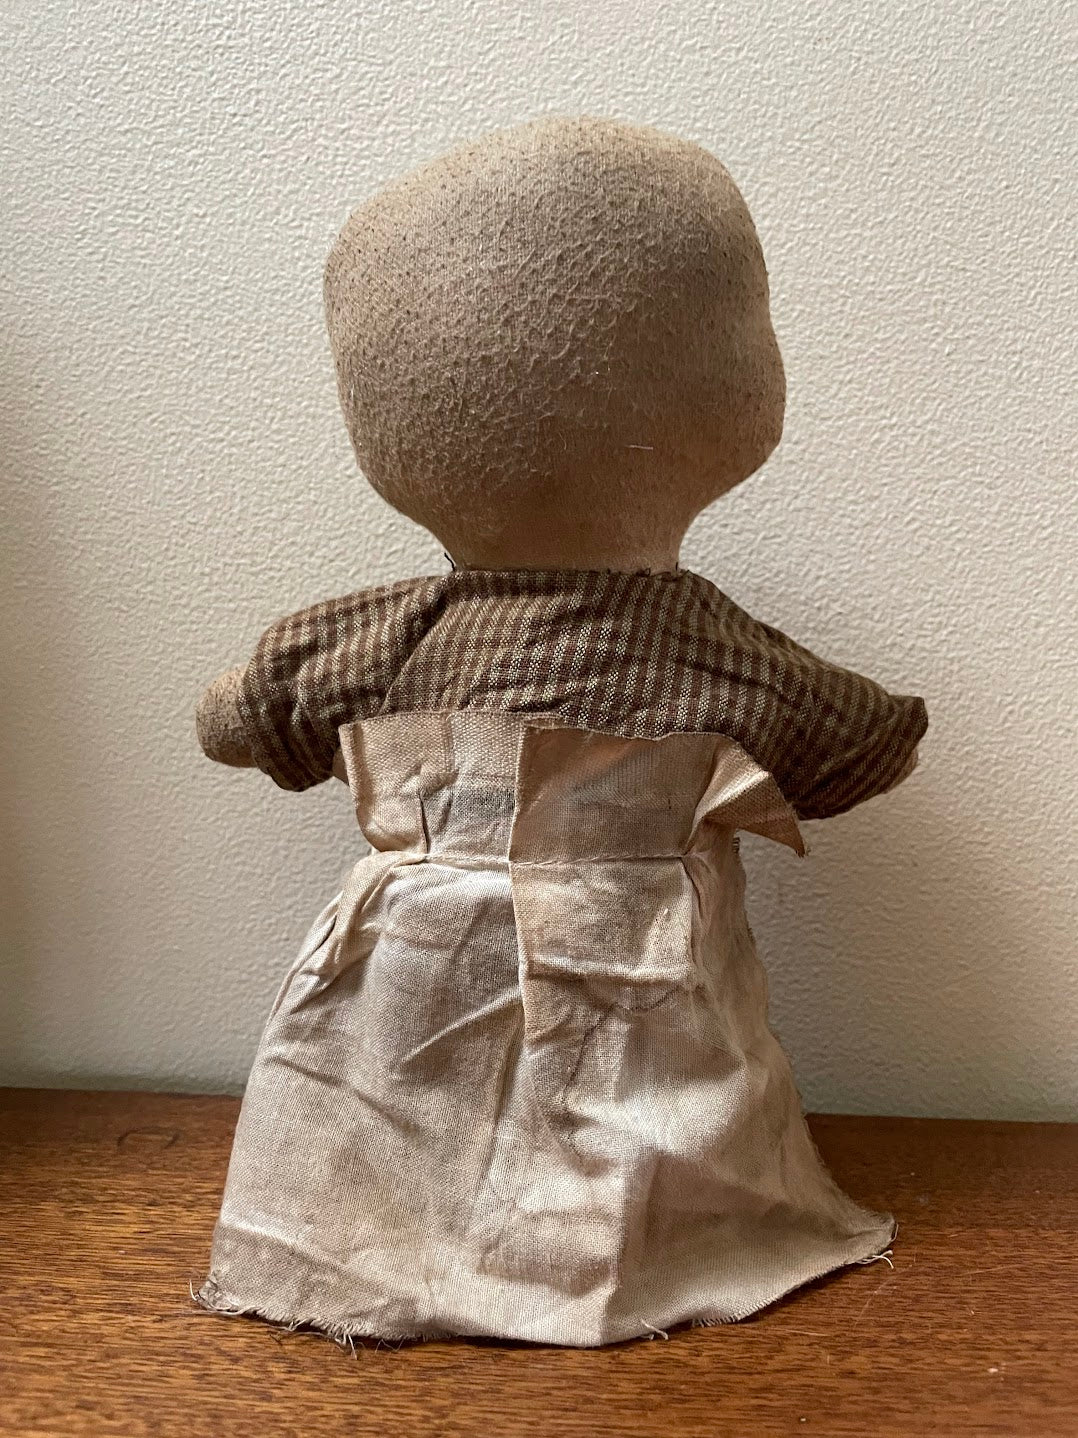 Primitive Handcrafted USA Folk Art 9&quot; Amish Doll with Apron